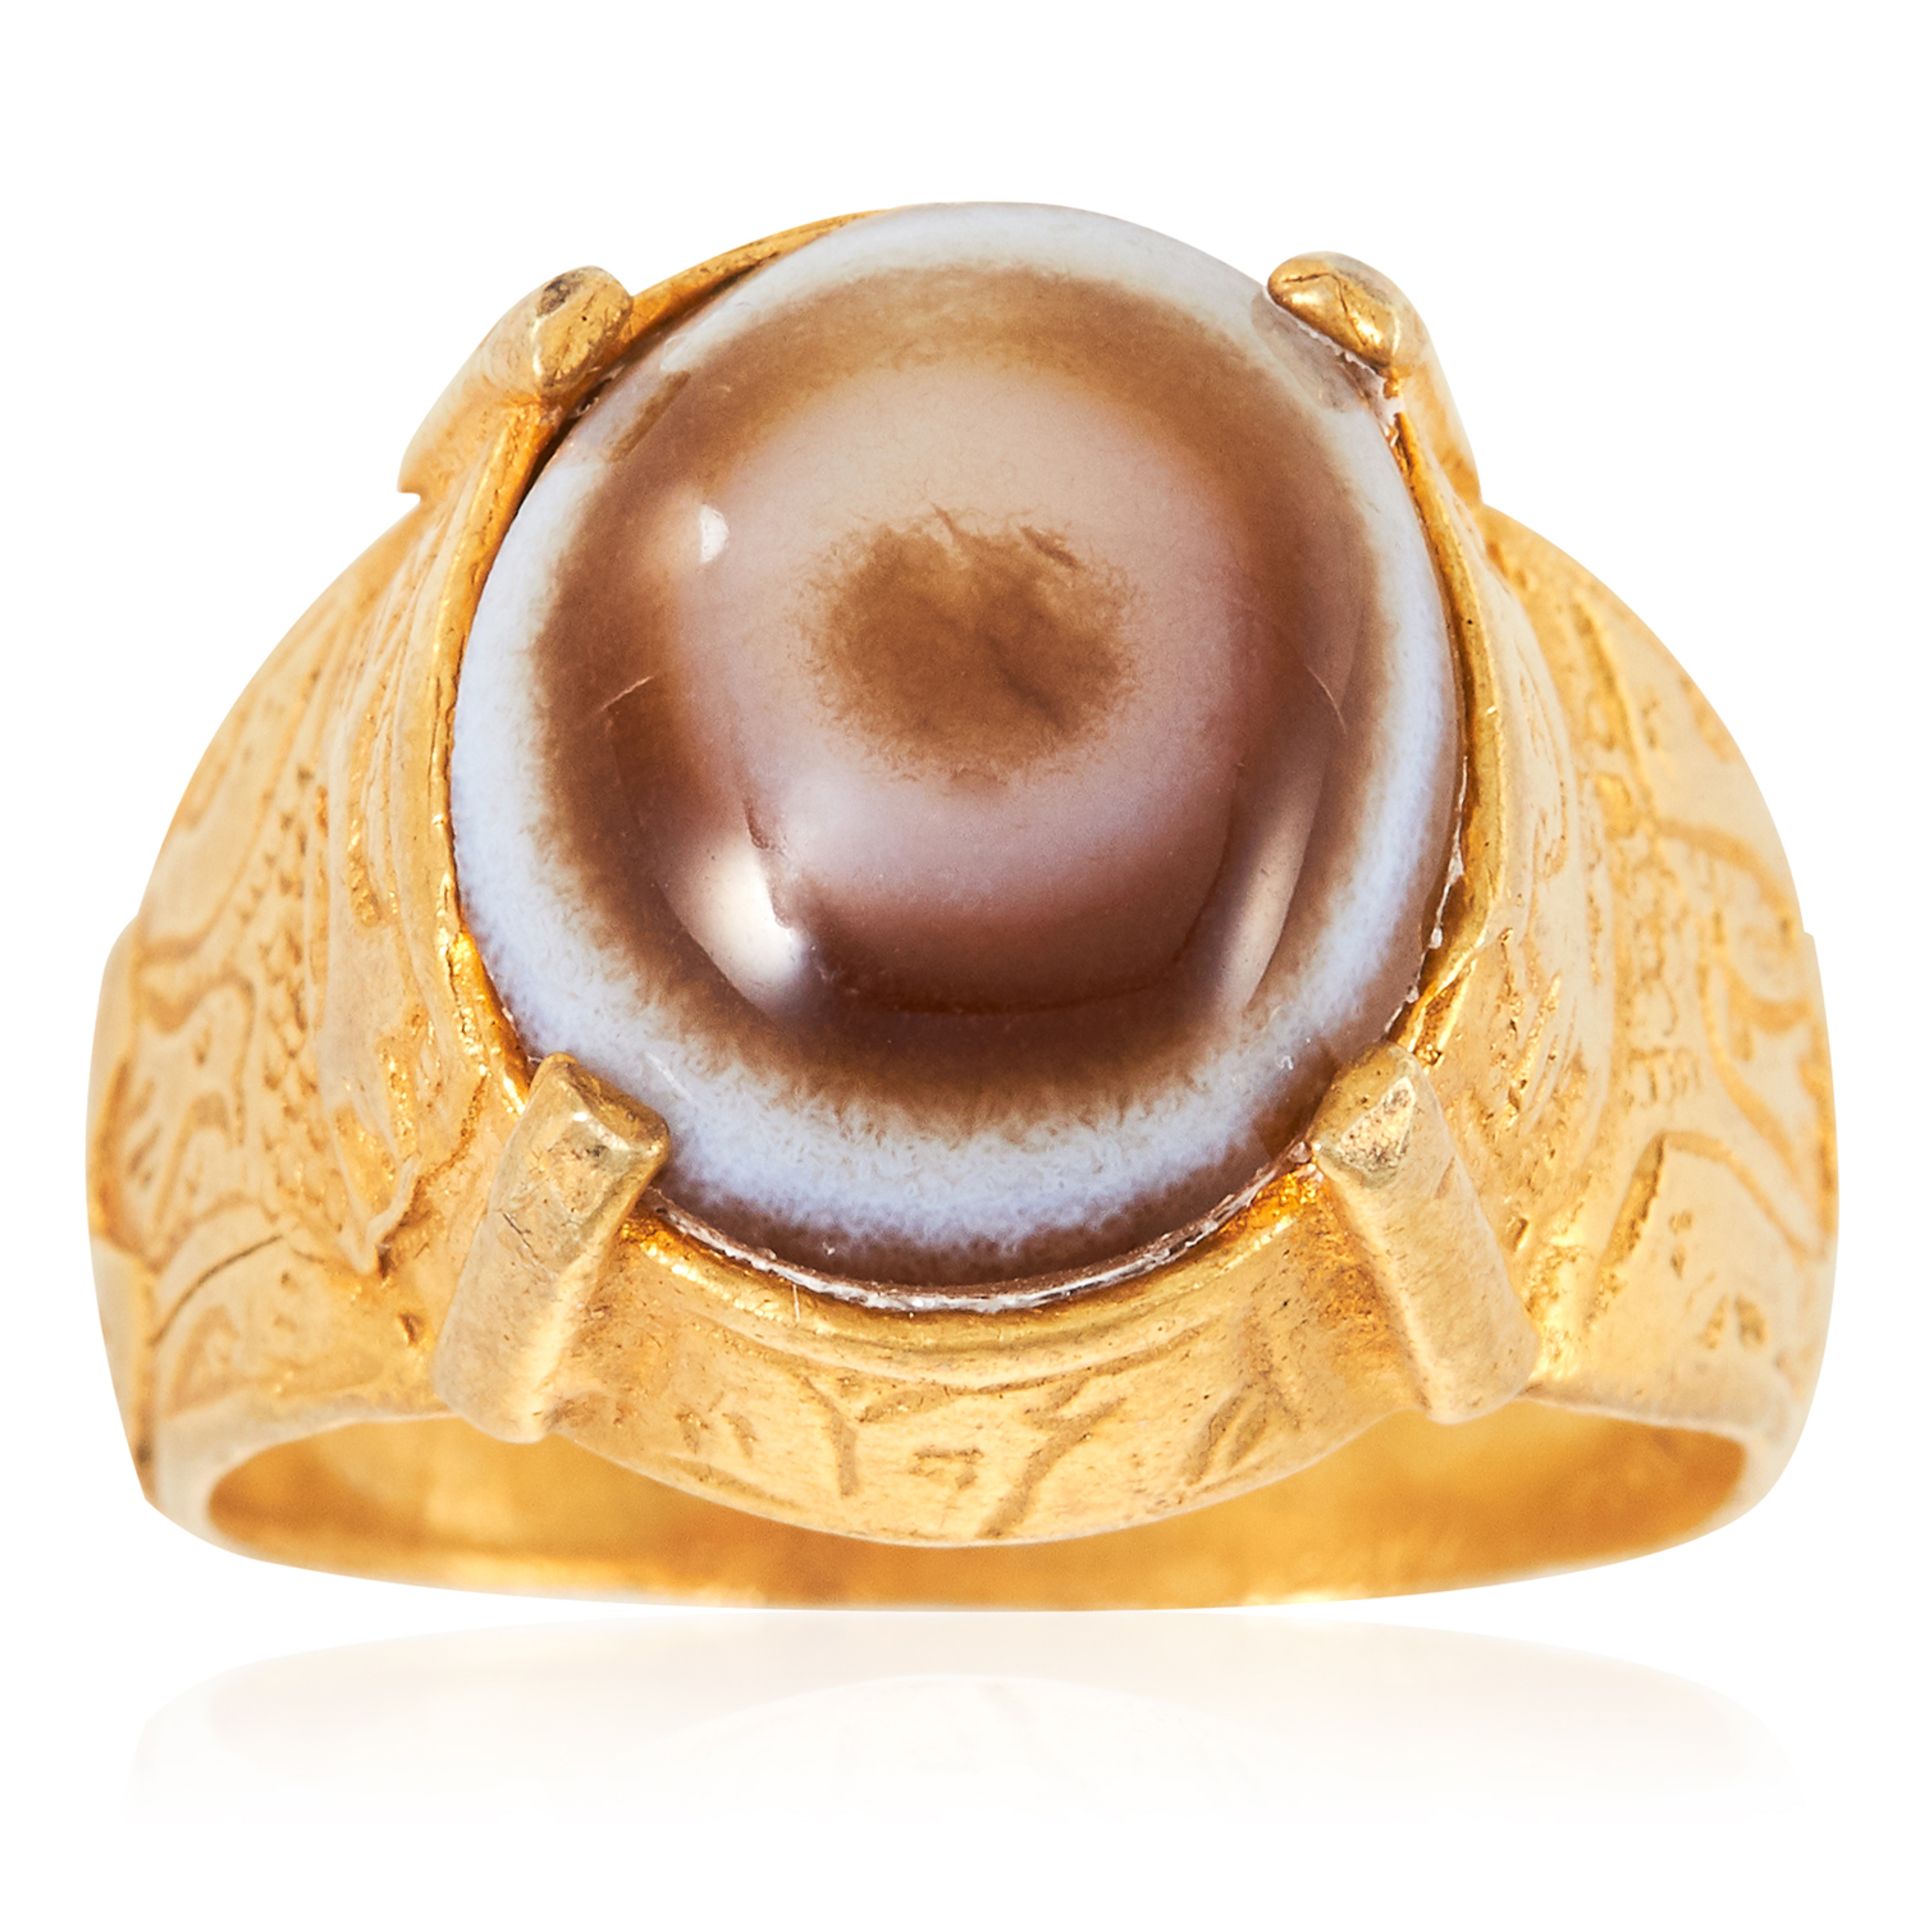 AN ANTIQUE HARDSTONE DRESS RING in high carat yellow gold, set with a cabochon hardstone in engraved